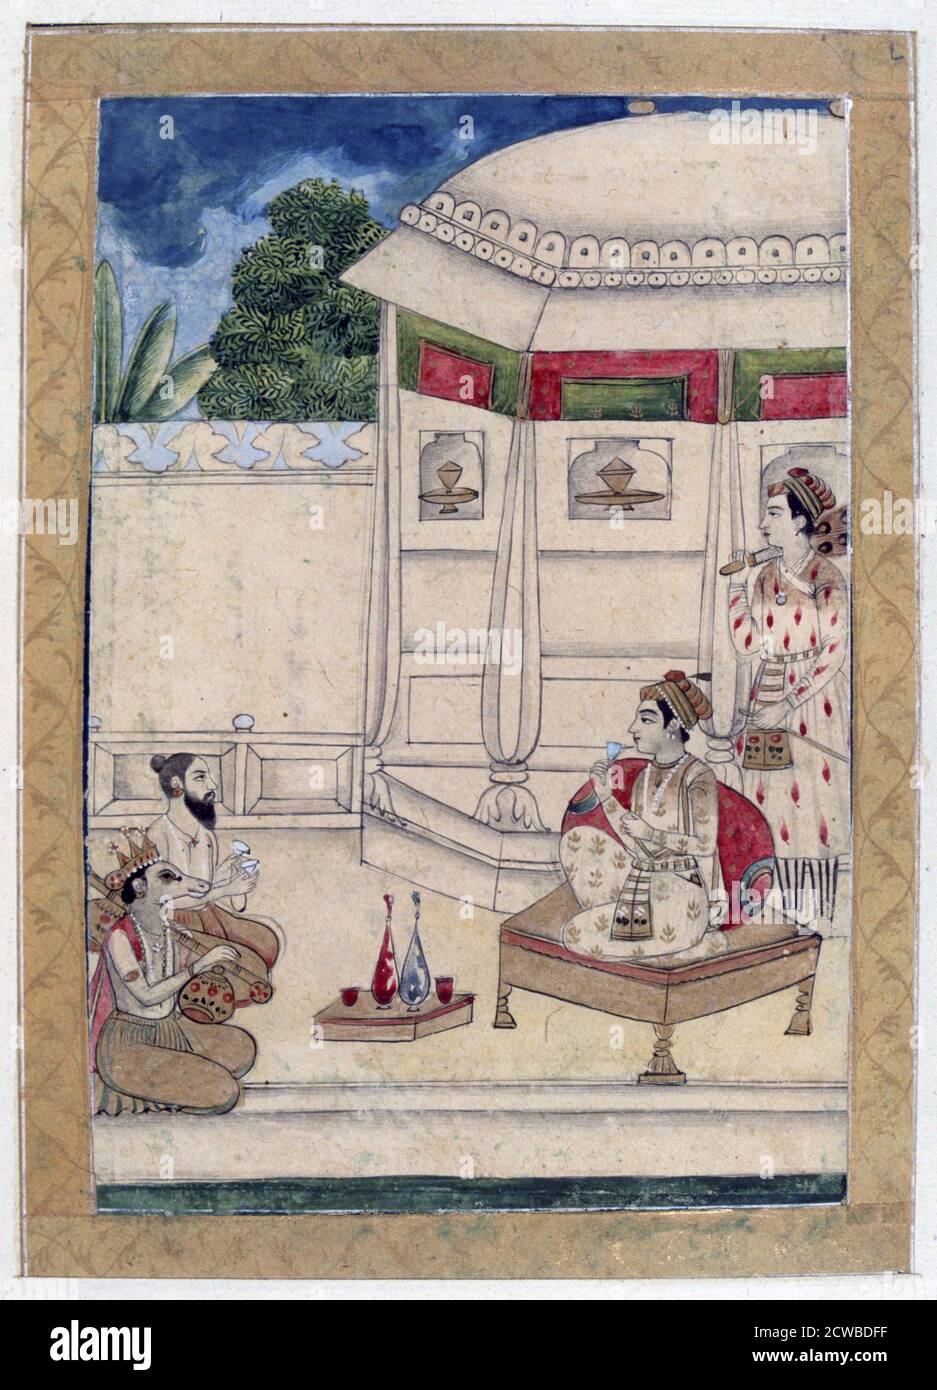 Sri Raga, Ragamala Album, School of Rajasthan, 19th century. A prince sitting on the terrace of a house where Narada and Kinnara are playing music. Narada or Narada Muni is a divine sage from the Hindu tradition. In Buddhist mythology and Hindu mythology. The artist is unknown. Stock Photo